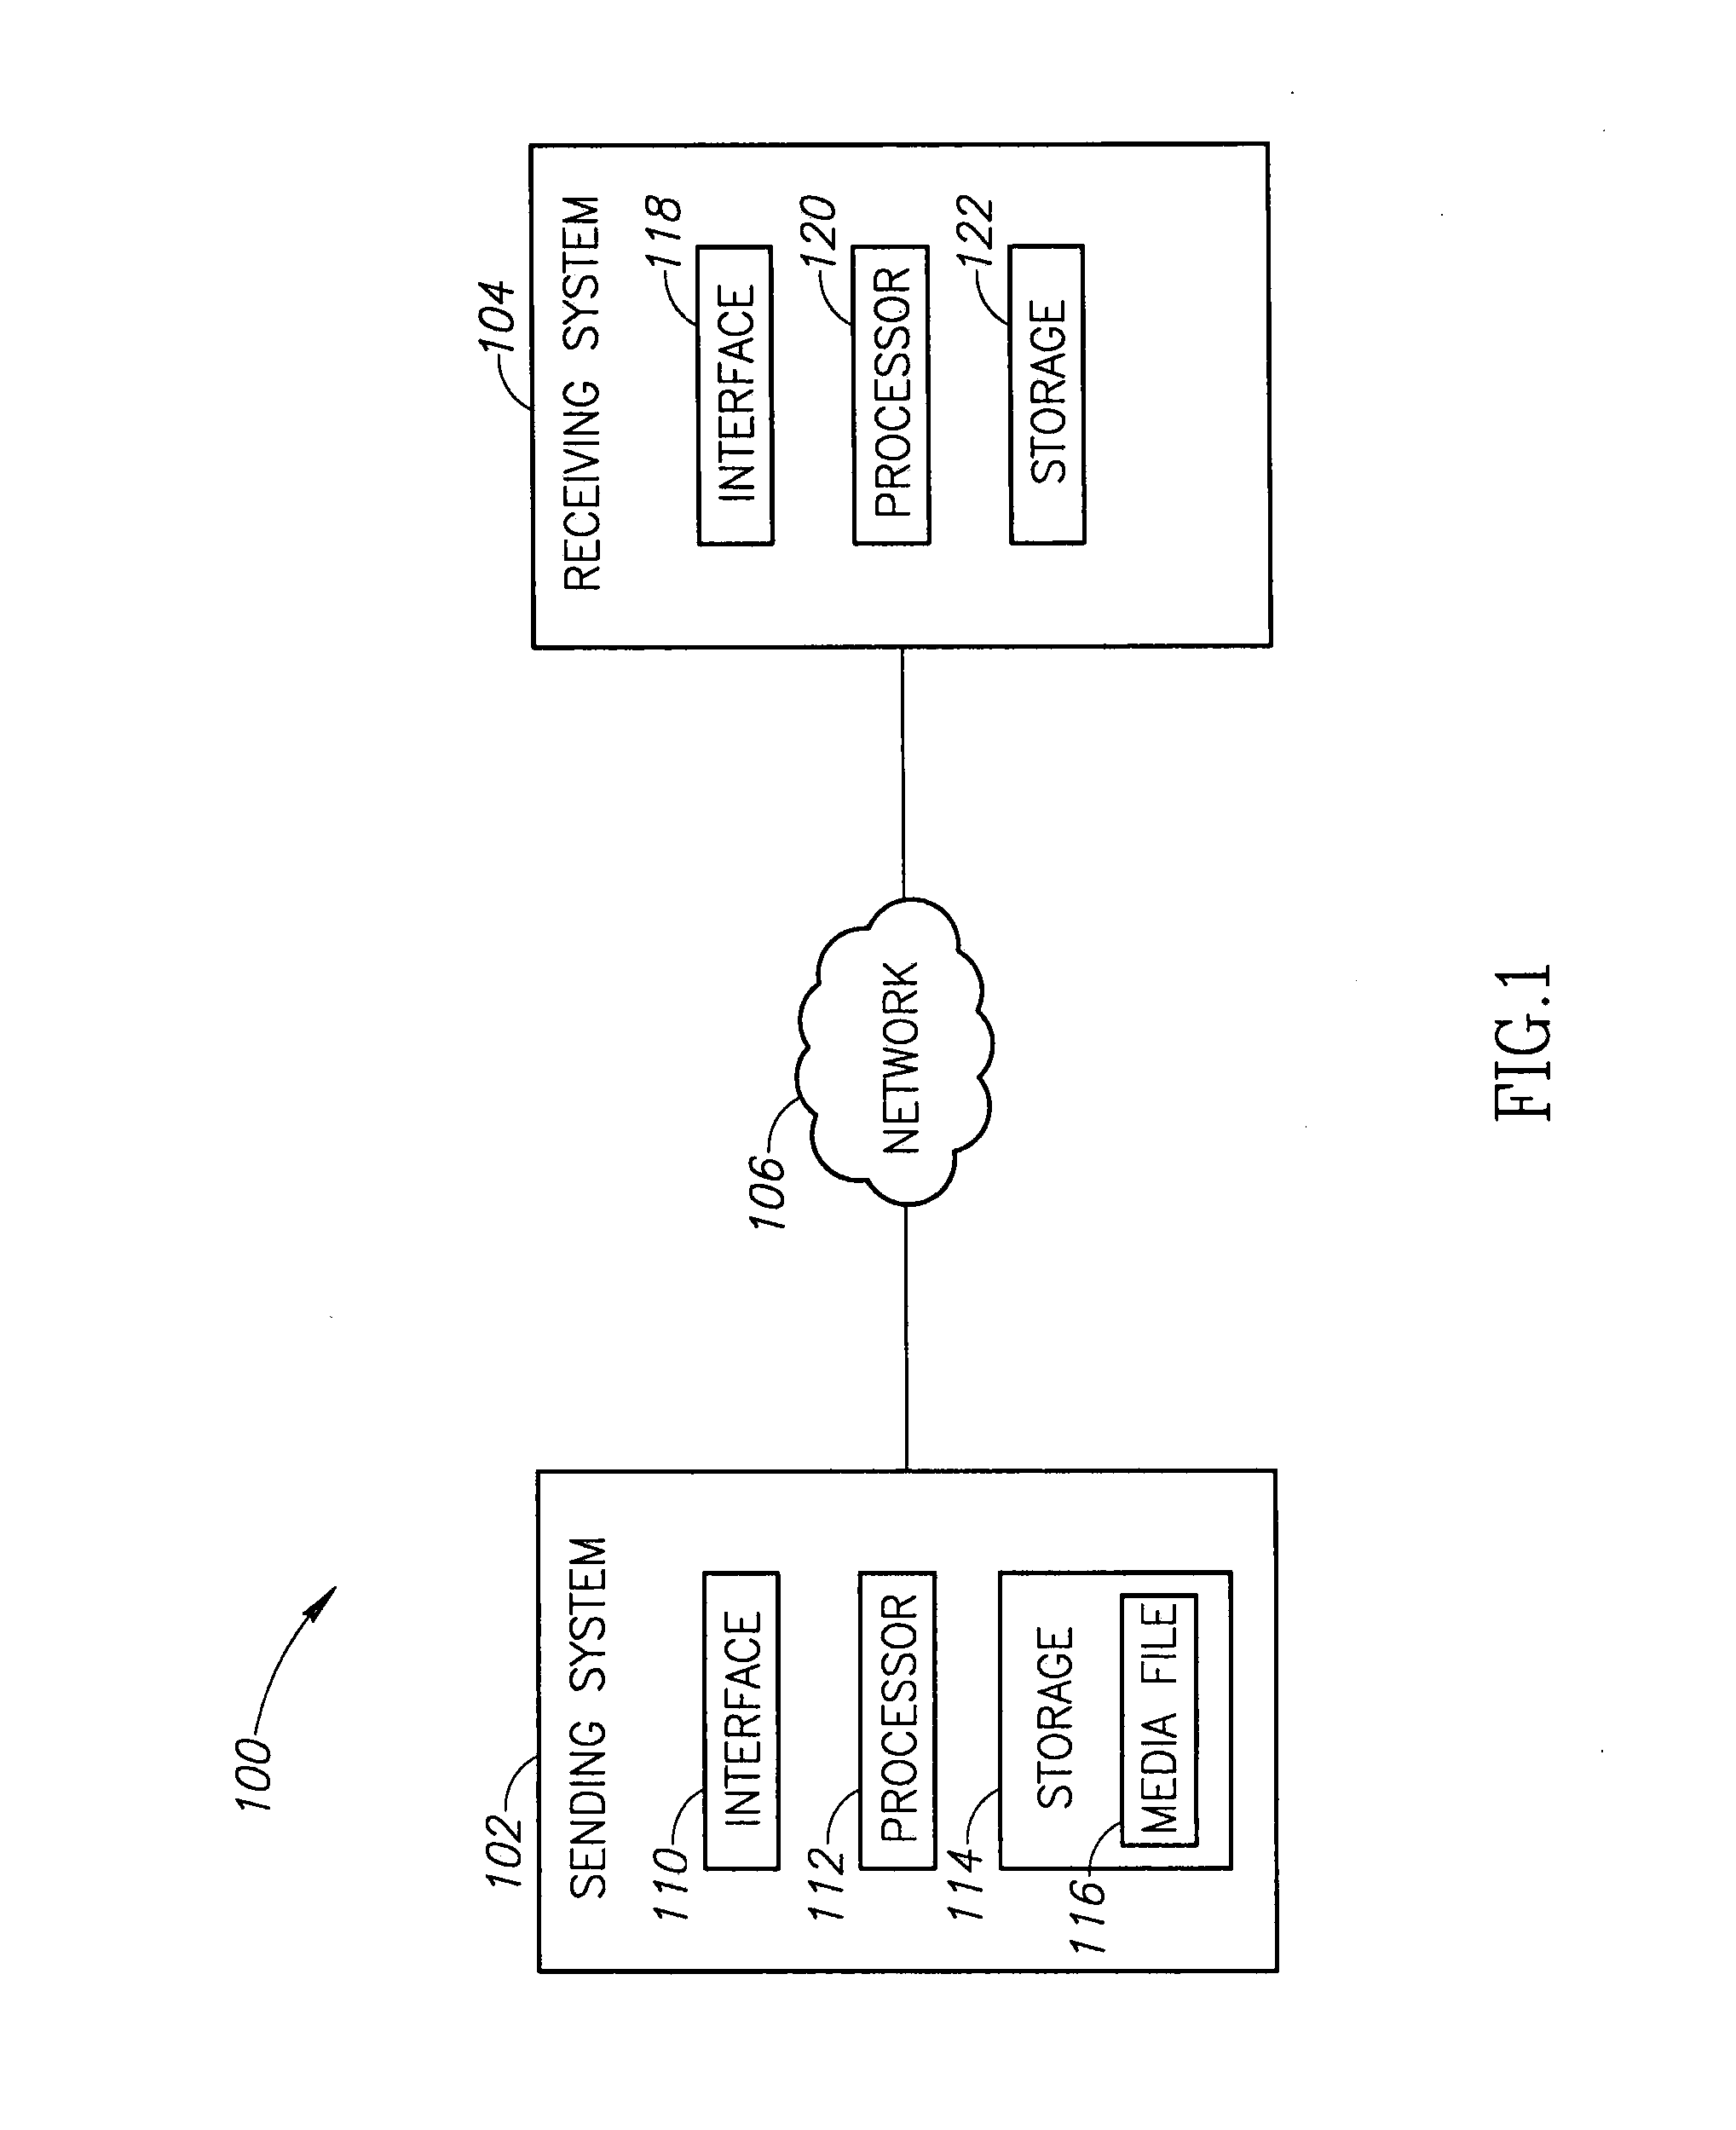 System and method for progressive download using surplus network capacity